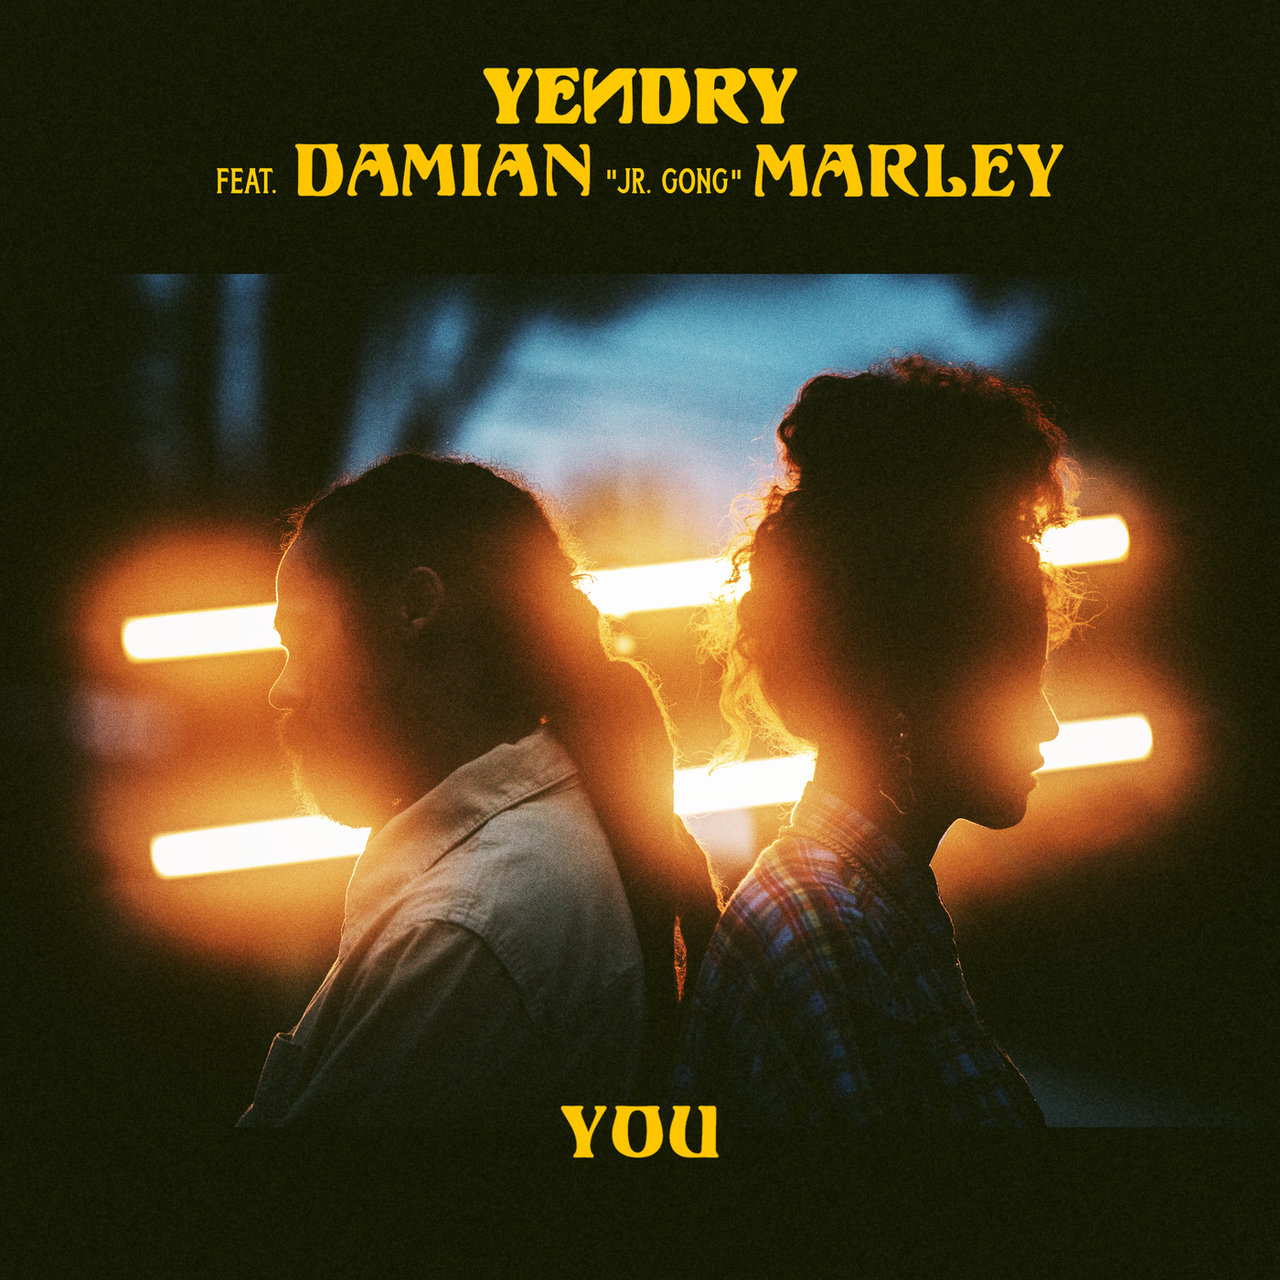 Yendry - You (ft. Damian Marley) (Cover)